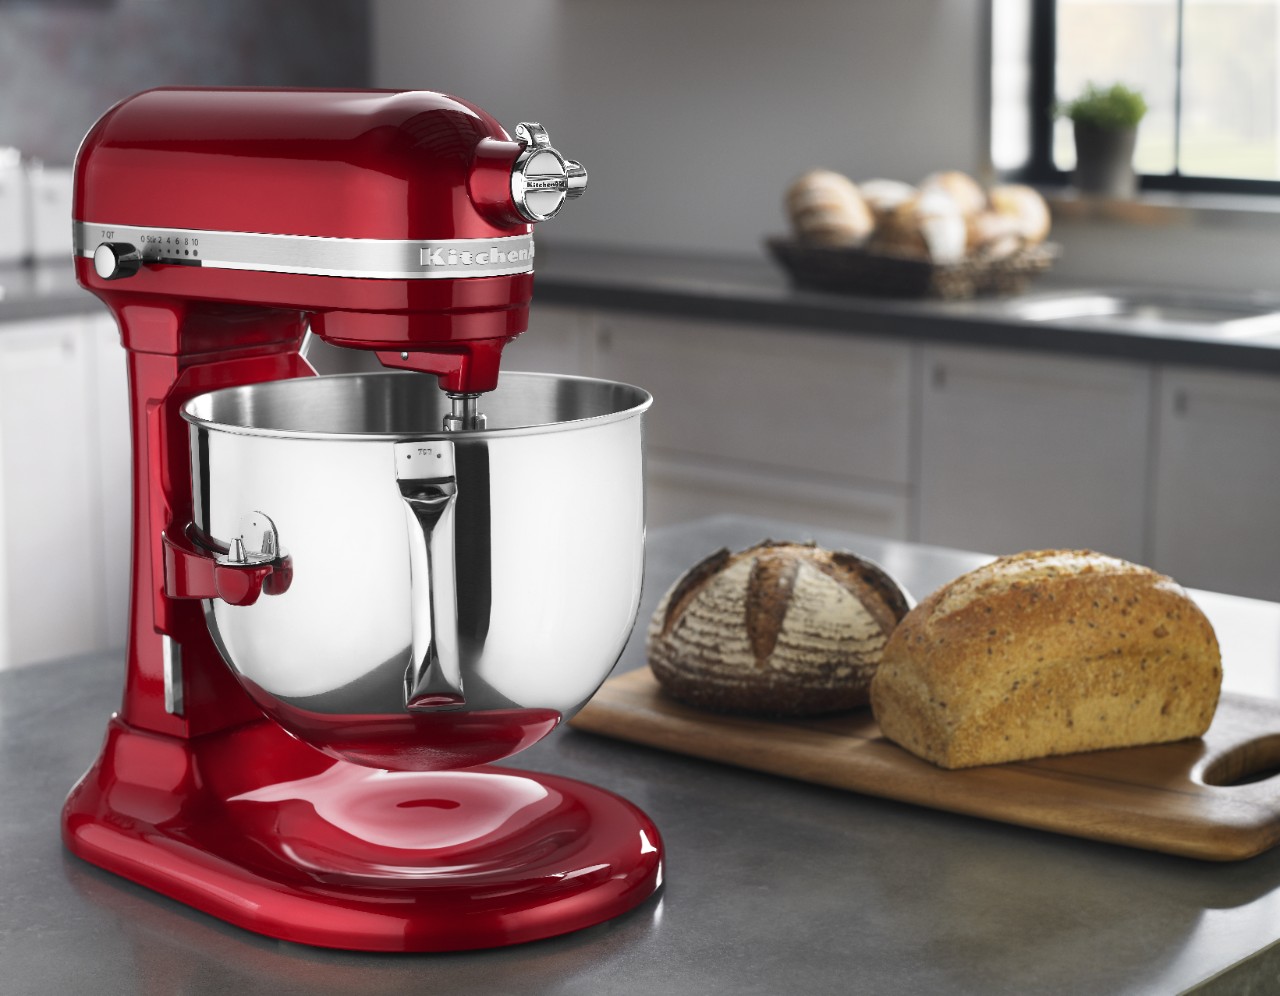 Professional appliances, including stand mixers, from KitchenAid.